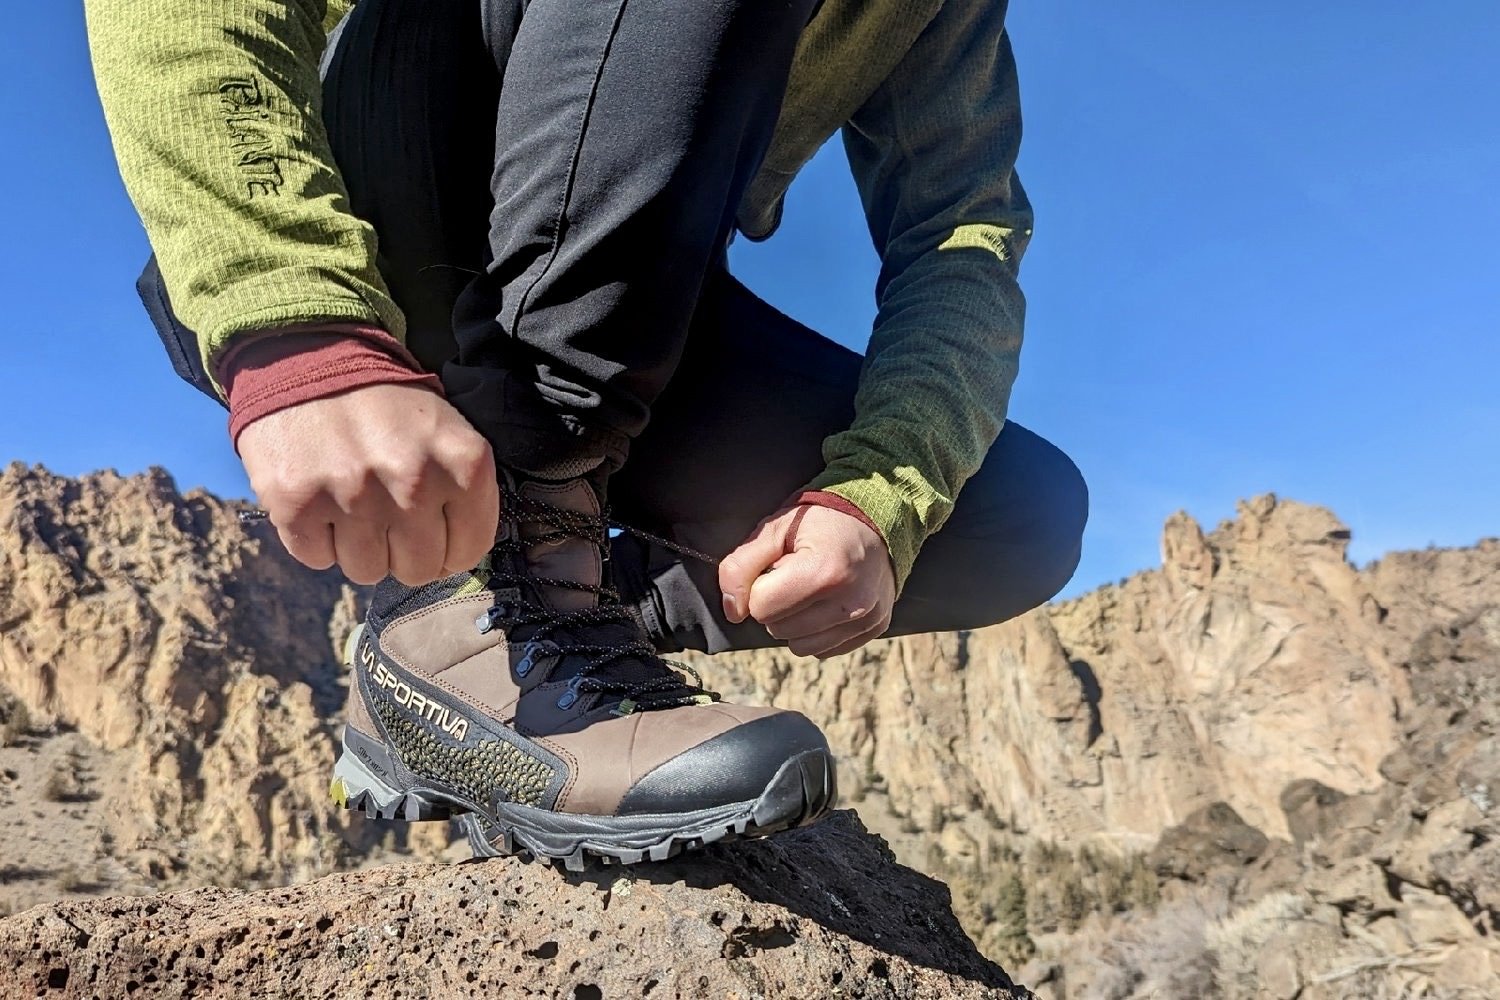 A hiker tying the shoelaces of the la sportiva nucleo boots